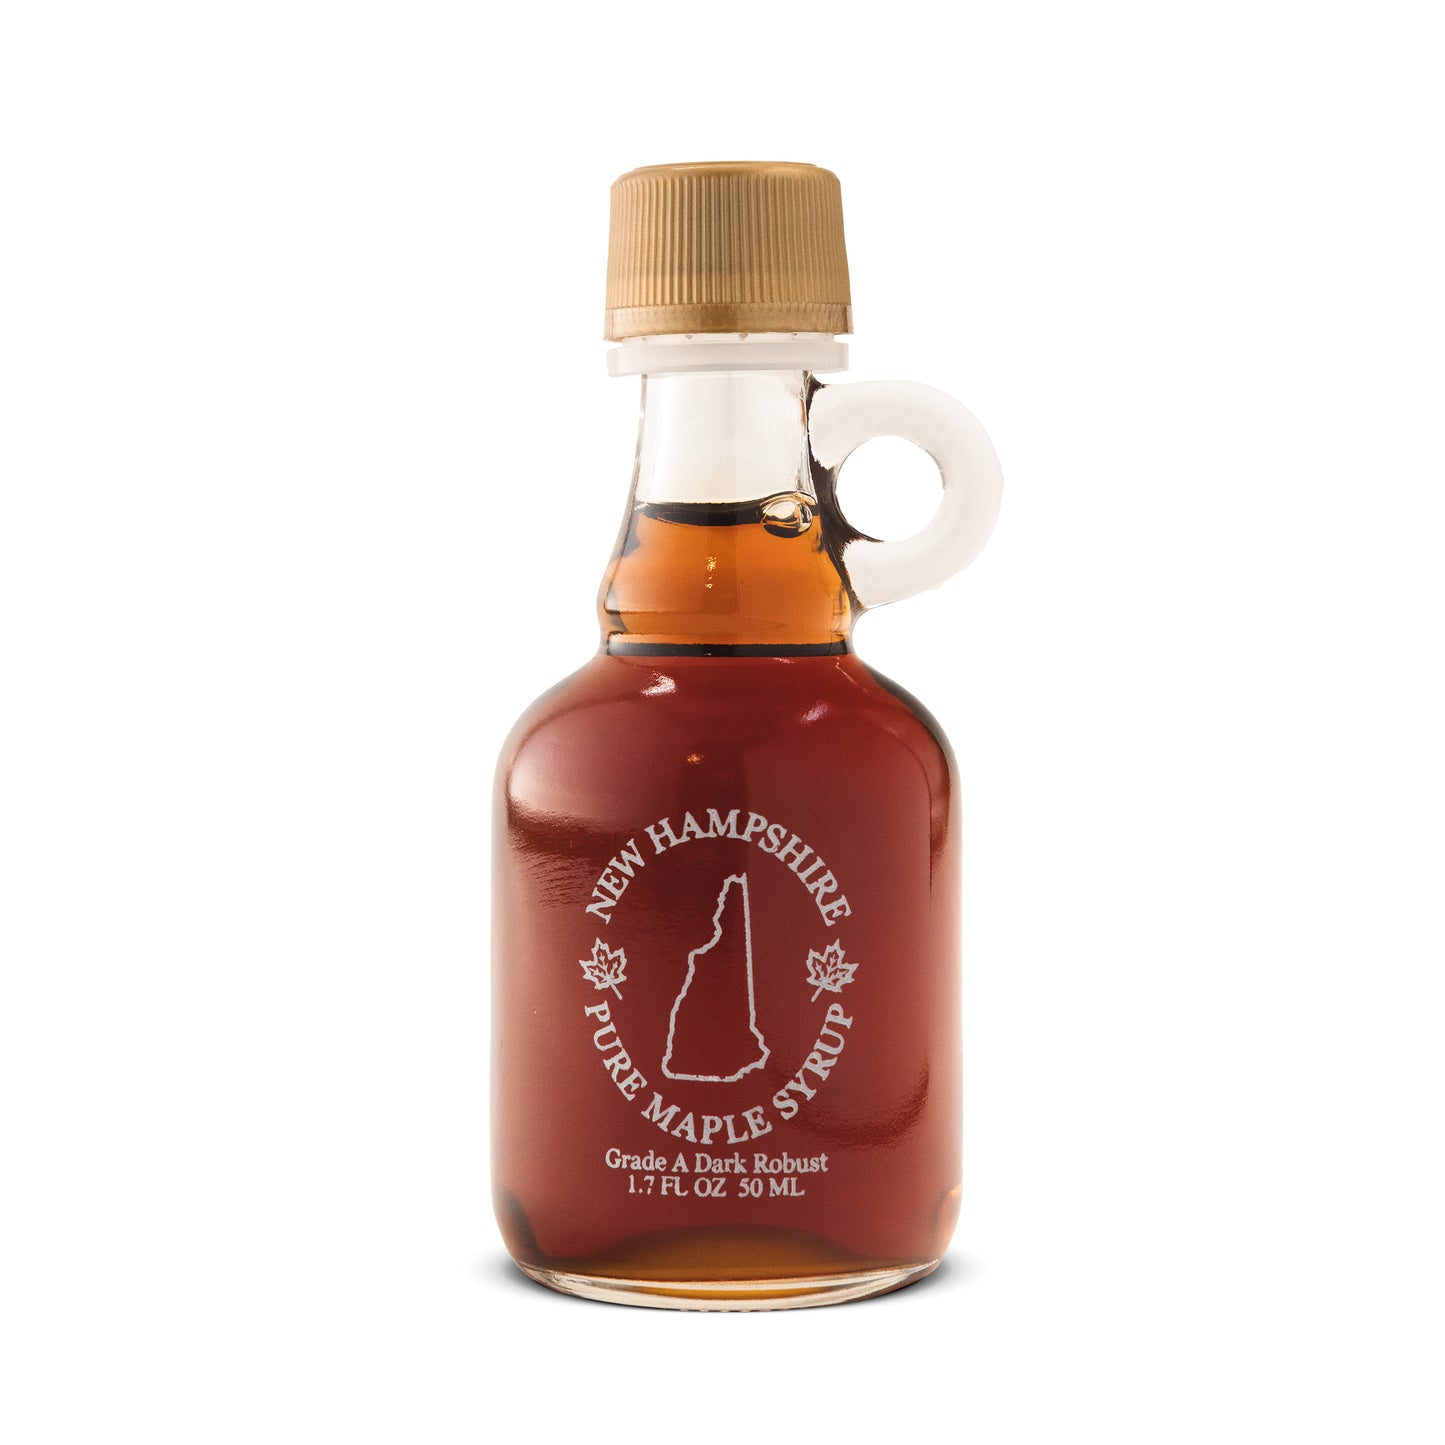 Ben's Pure Maple Syrup Favors - New Hampshire Glass Nip Bottle - 1.7 oz